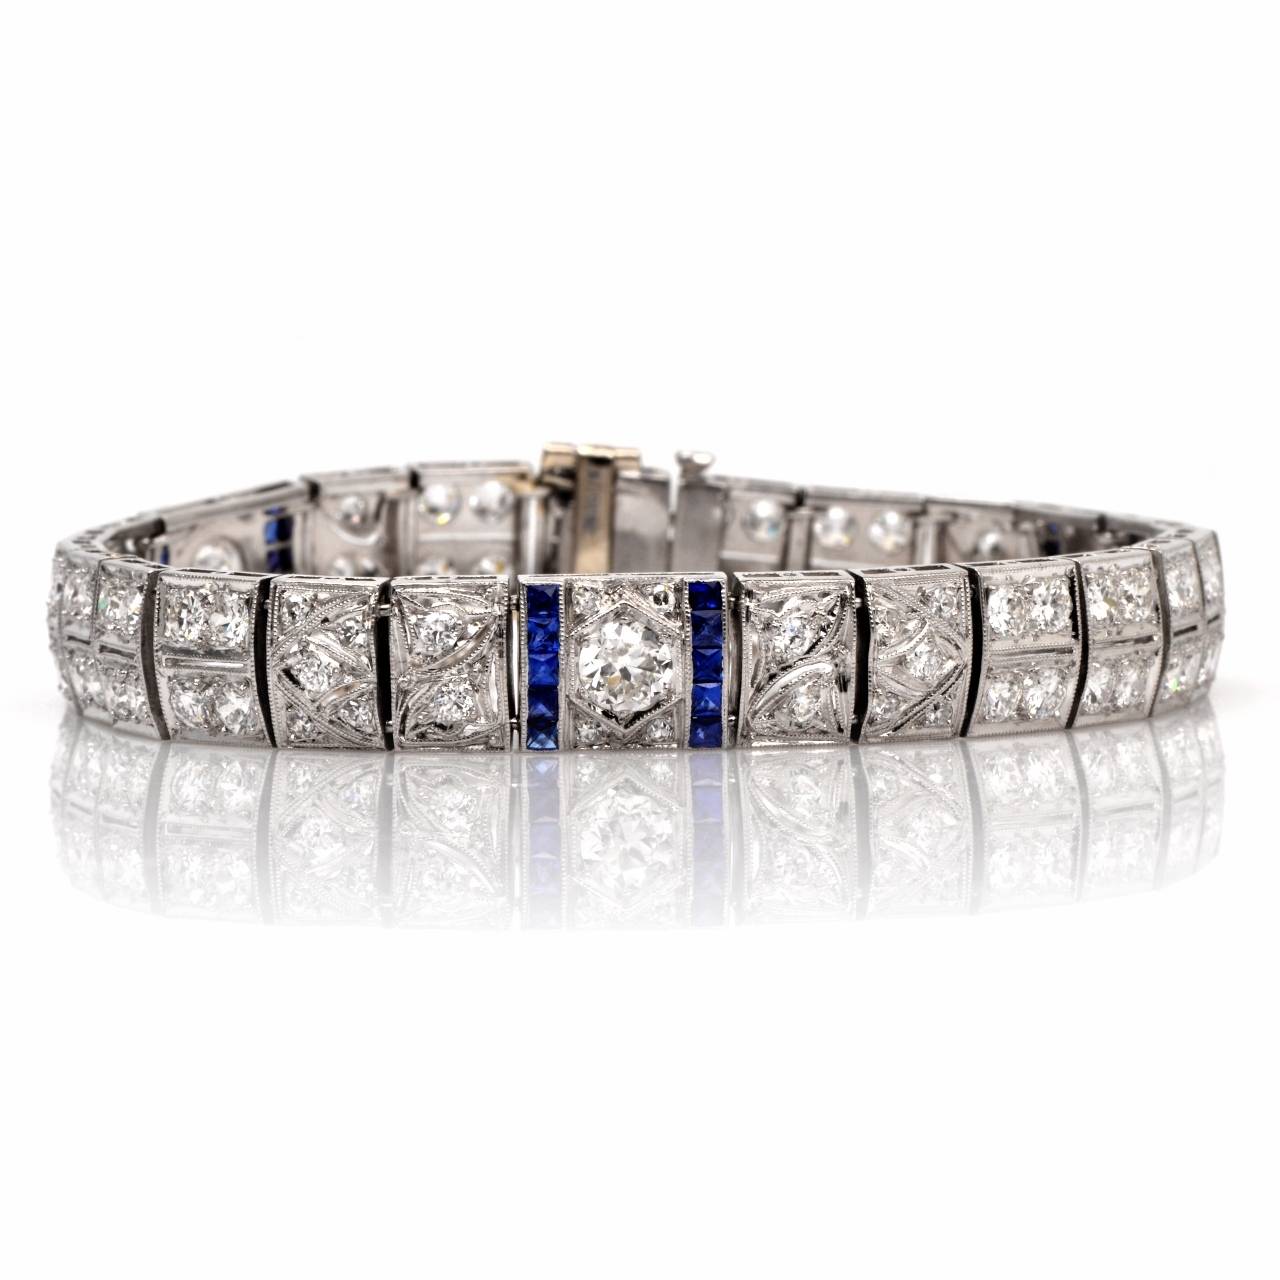 This captivating and authentic Art Deco bracelet of unsurpassed refinement and feminine grace  is   crafted in solid platinum, weighing 24.3 grams and measuring 6.9